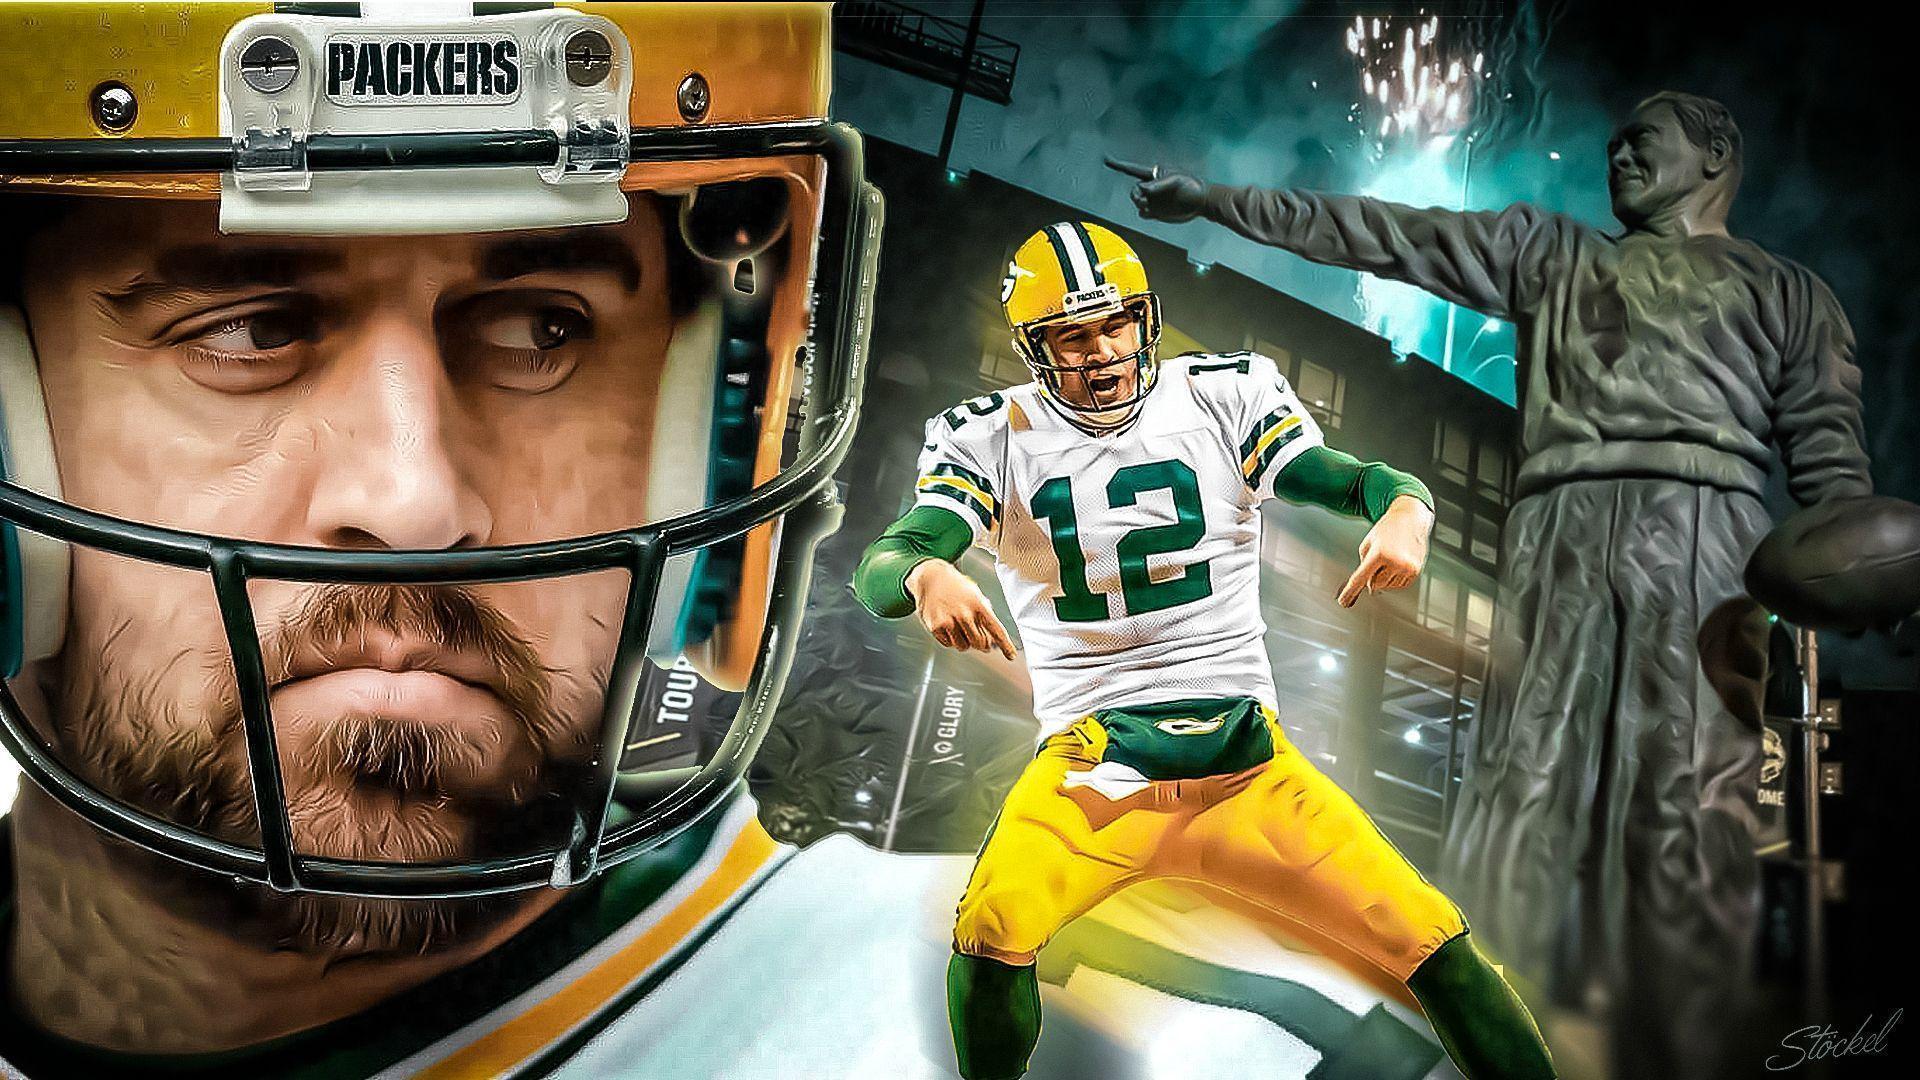 Made today this Aaron Rodgers The Man Wallpaper (16:9). Feedback